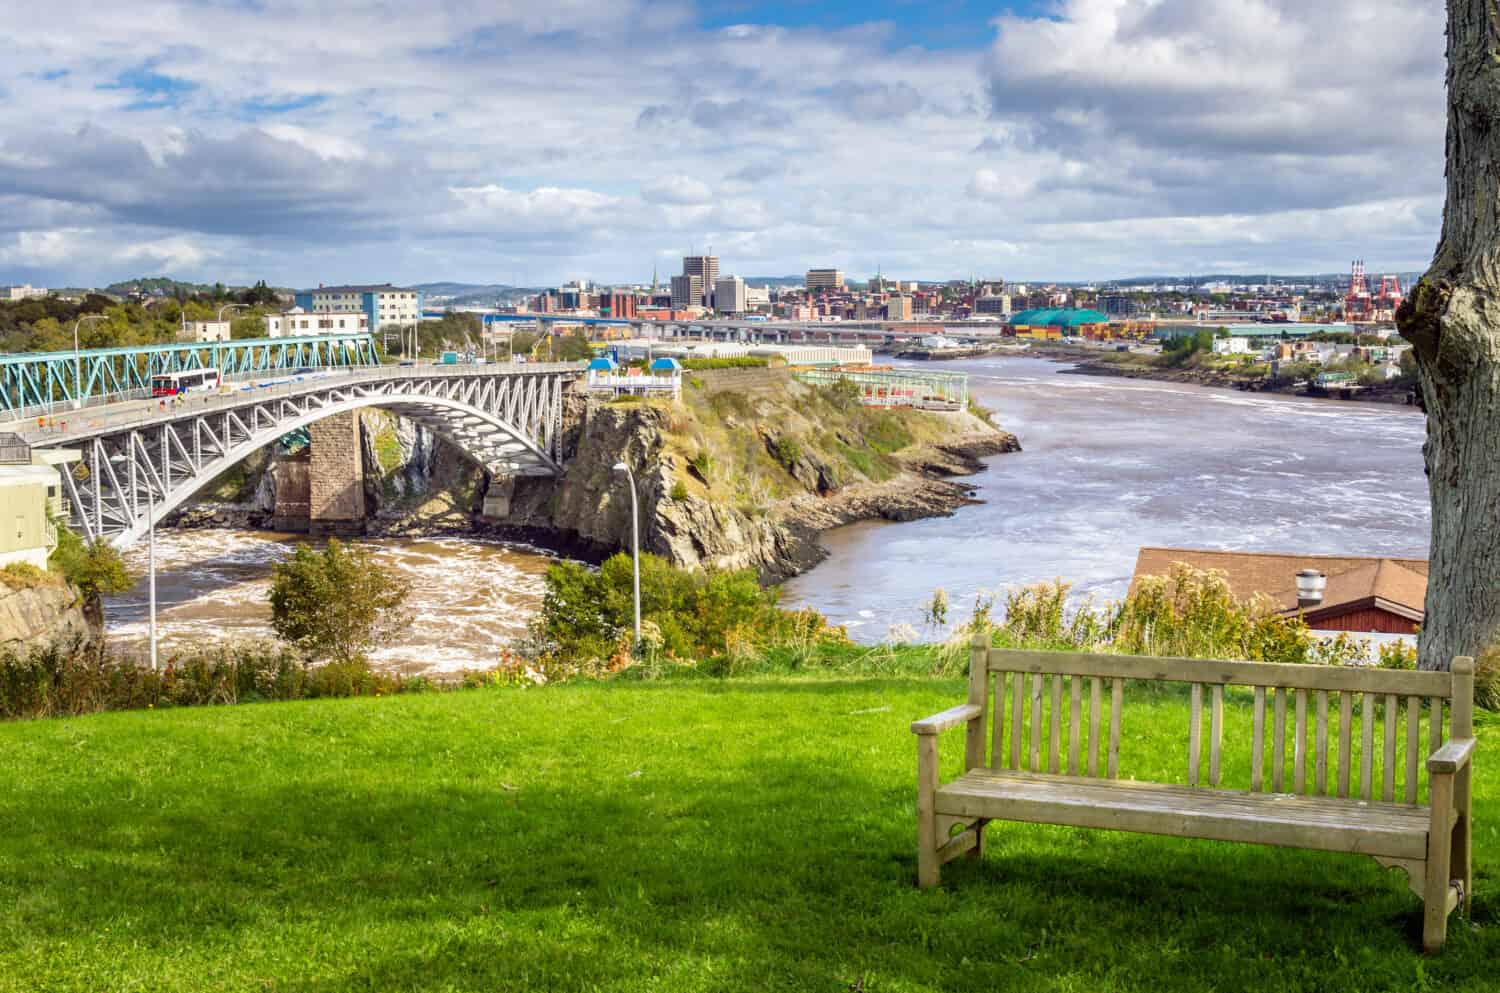 Saint John, New Brunswick, from the Reversing Falls Park with an Empty Wooden Bench in Foreground.